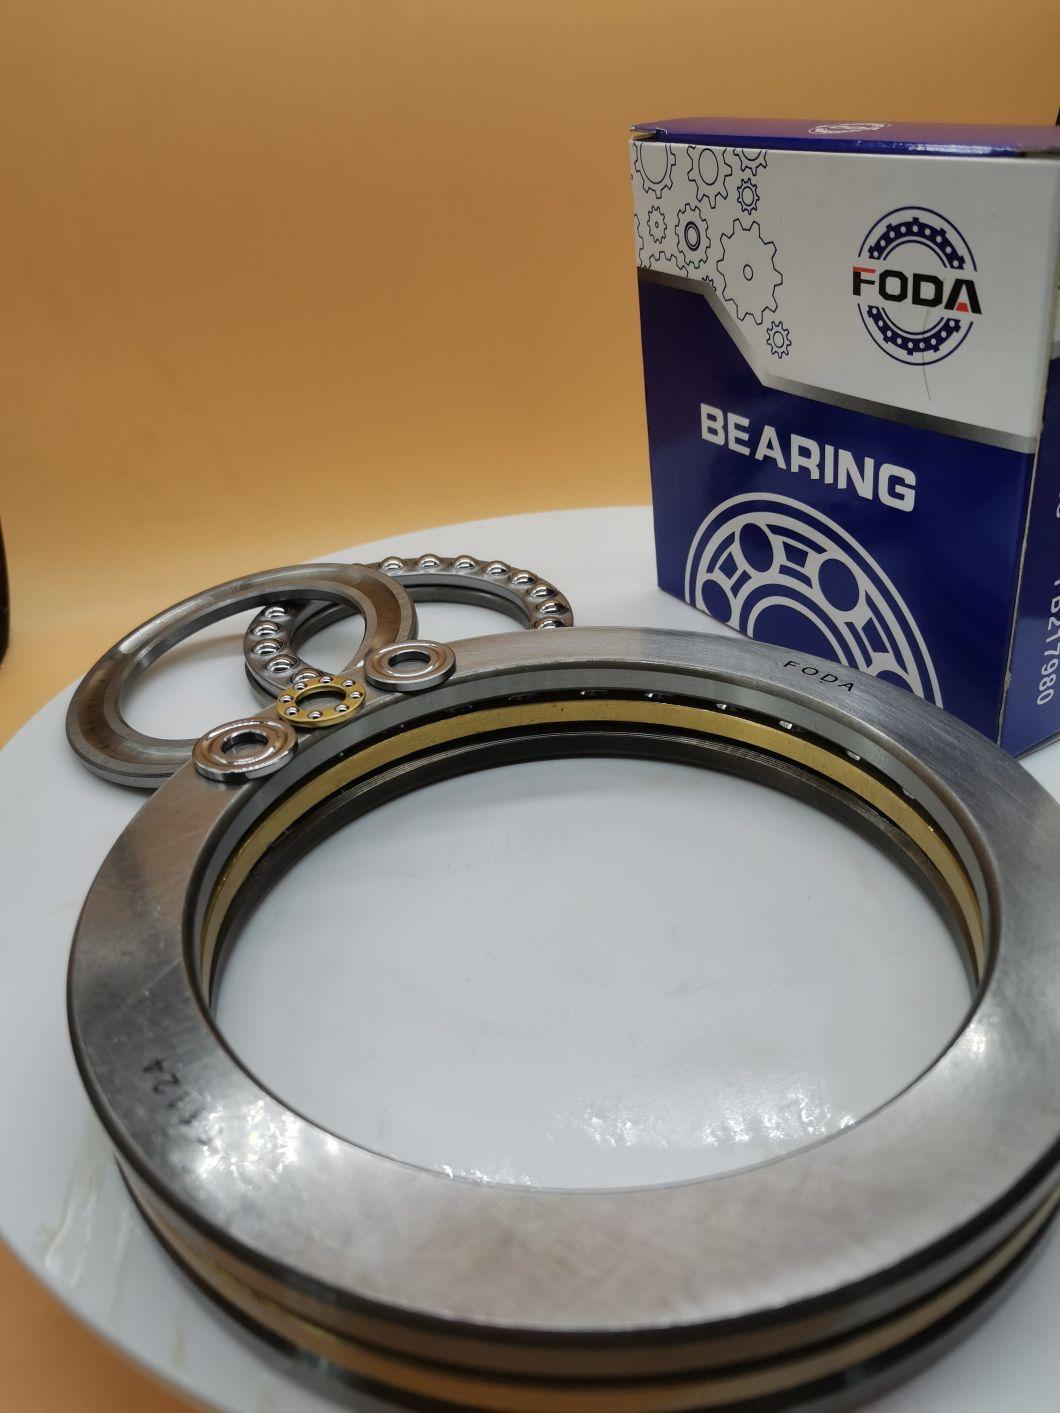 High Quality Like /Low Speed Reducer/Thrust Ball Bearings for Crane Hooks/Rolling Bearings/Thrust Ball Bearings for Jacks/ Thrust Ball Bearings of 512334